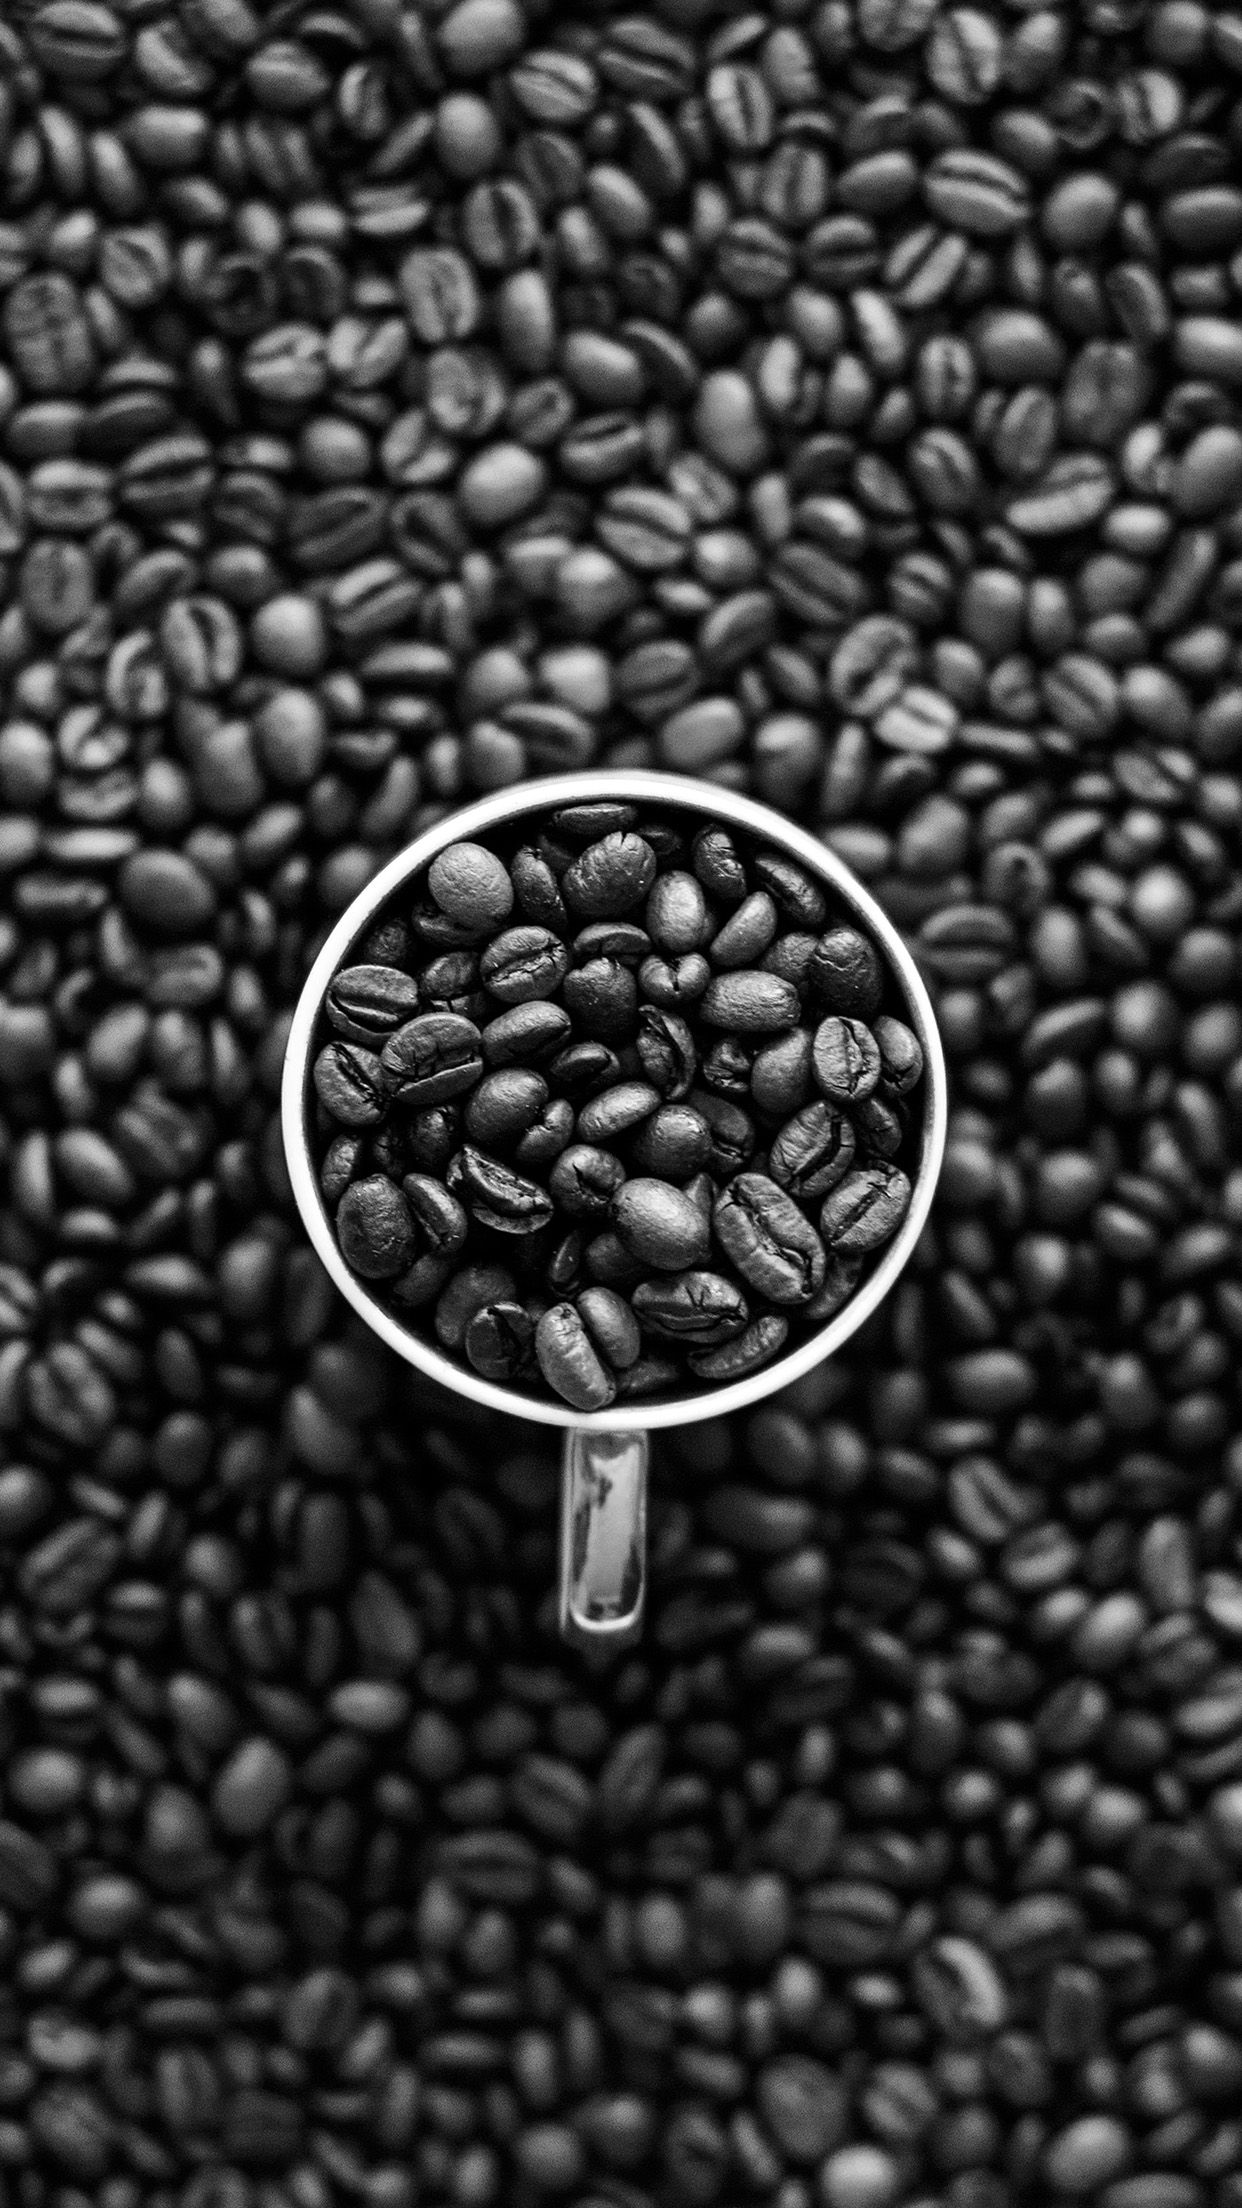 A black and white photo of coffee beans - Coffee